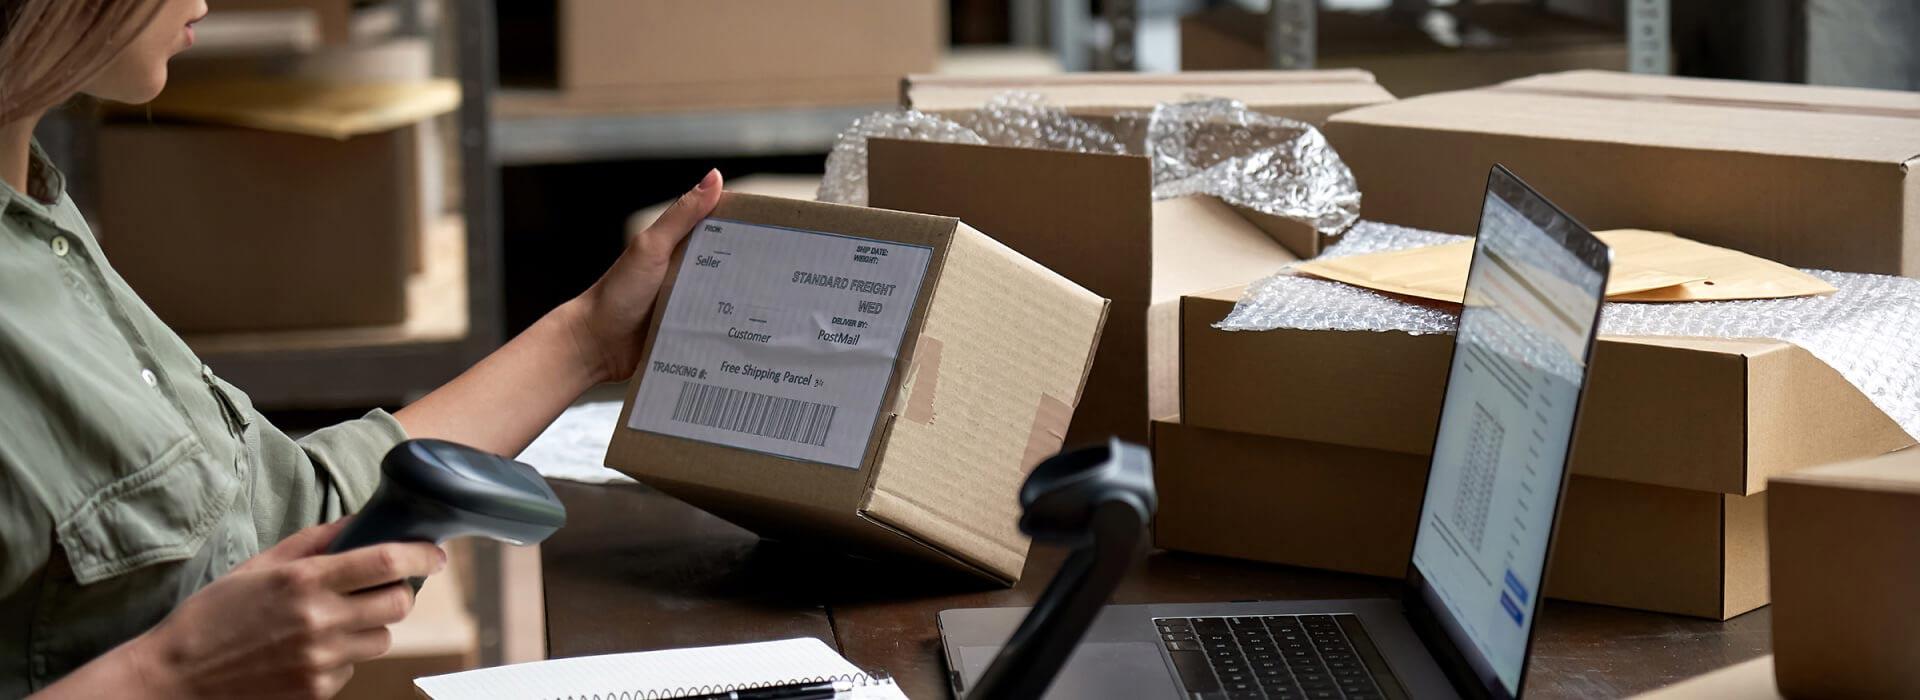 Woman scanning a shipping label amidst boxes in a warehouse setting